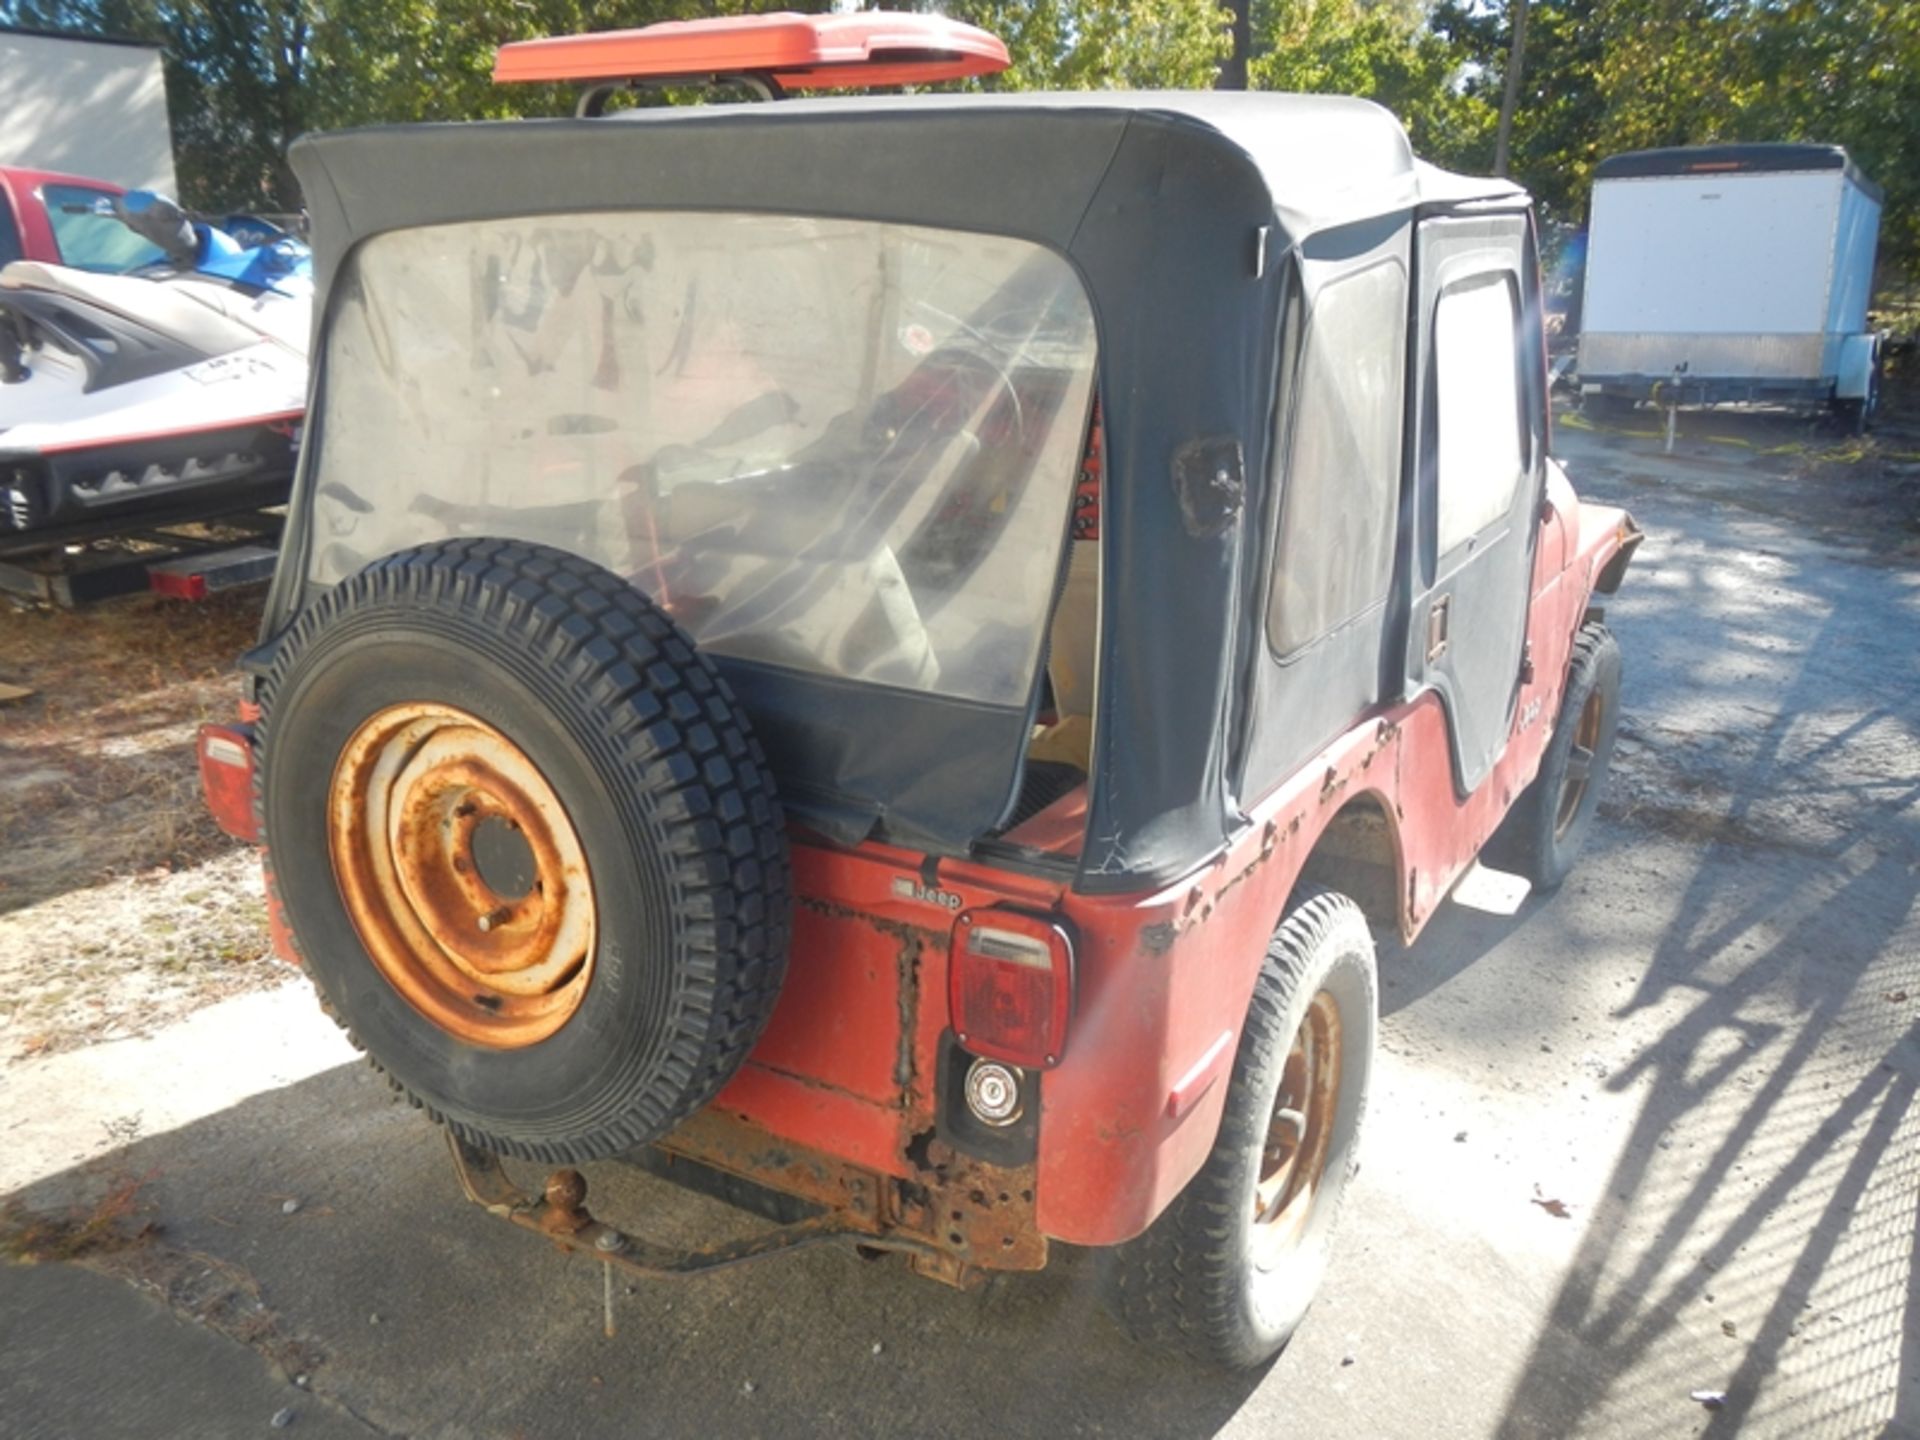 1979 JEEP CJ5 - complete running vehicle - lots of rust mileage unknown - J9F83AC811255Chasis is eat - Bild 3 aus 6